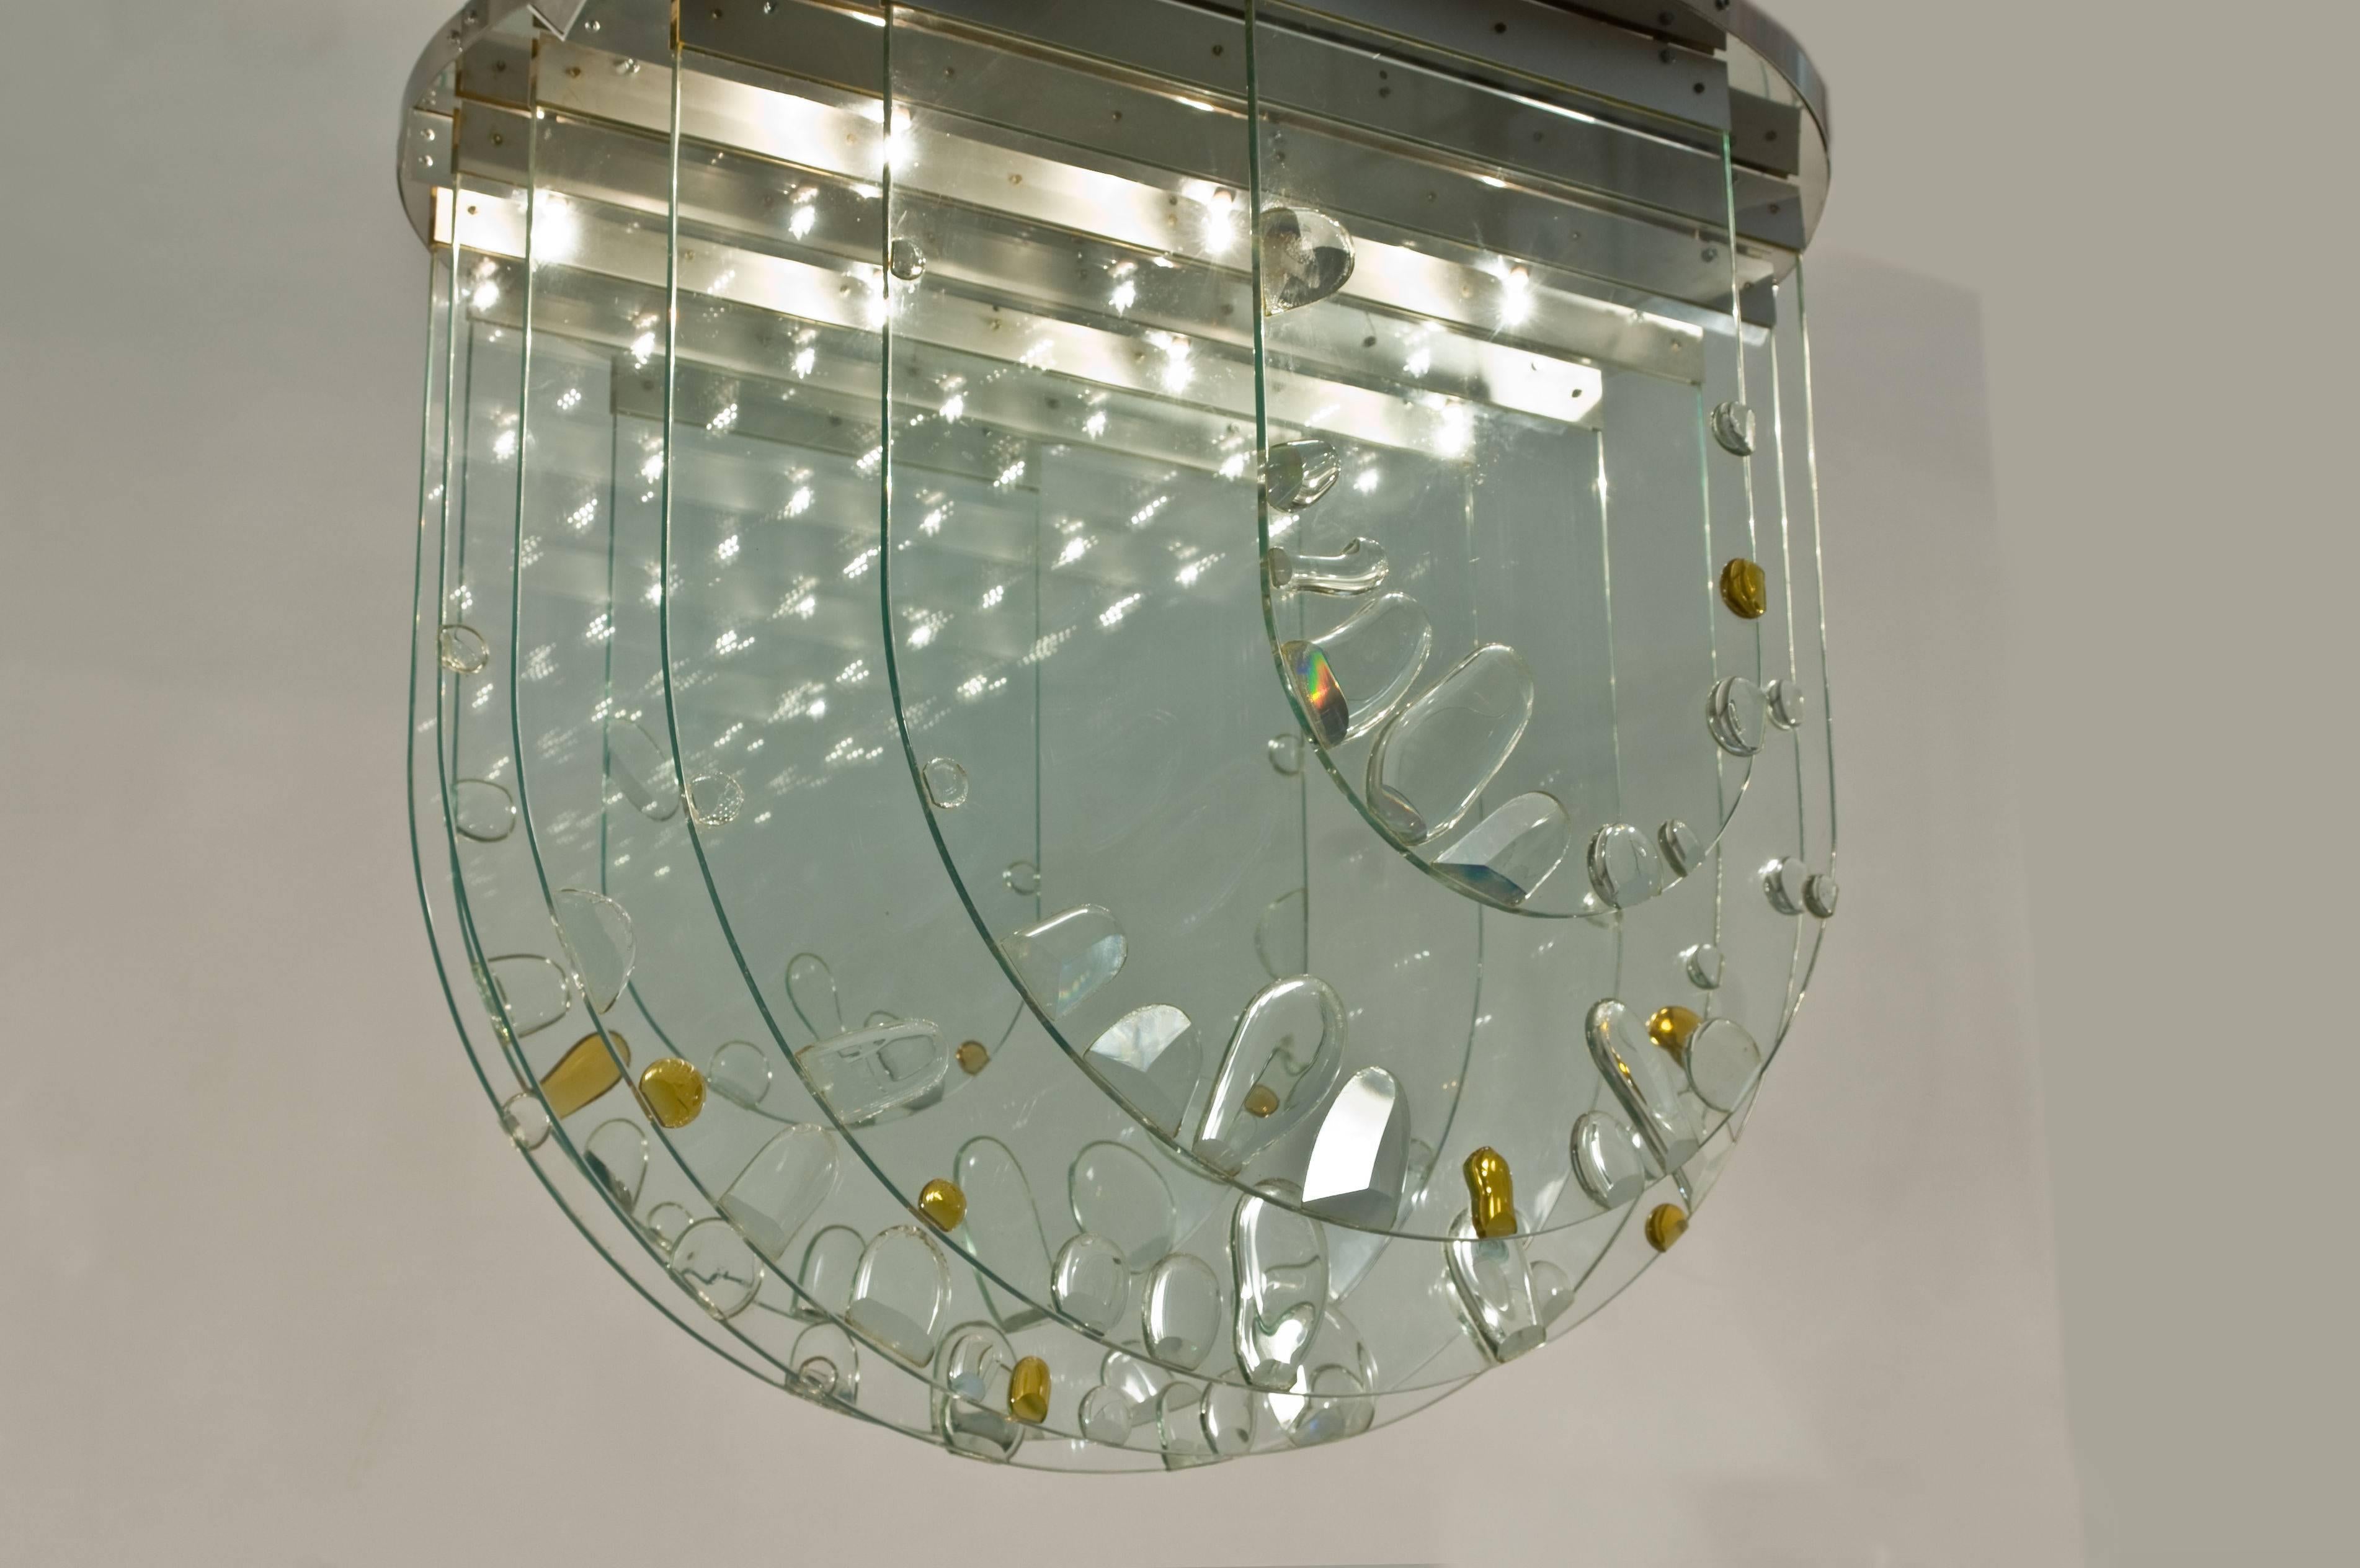 Mid-20th Century Ceiling Light by Rene Roubicek for Hotel Brno, Czech Republic 1960 For Sale